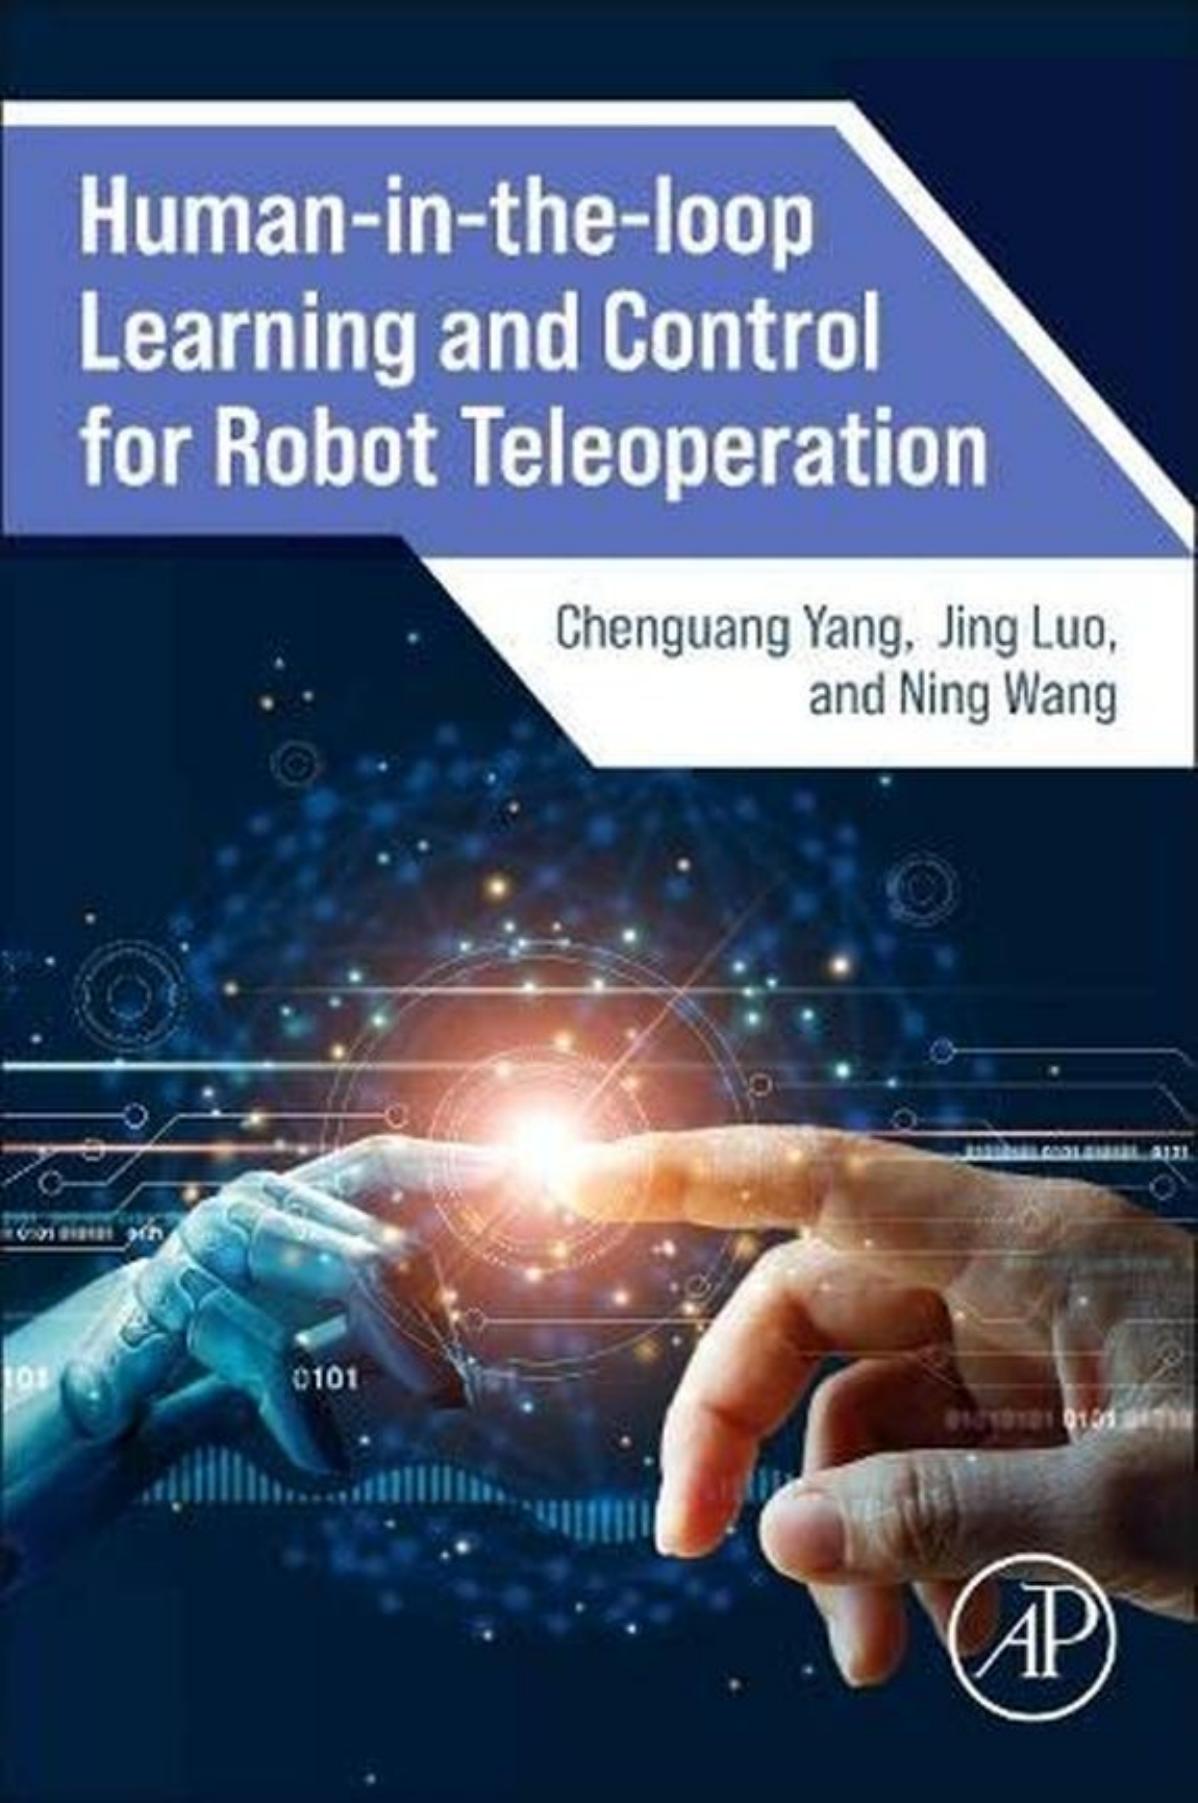 Human-In-the-loop Learning and Control for Robot Teleoperation by CHENGUANG YANG JING LUO NING WANG